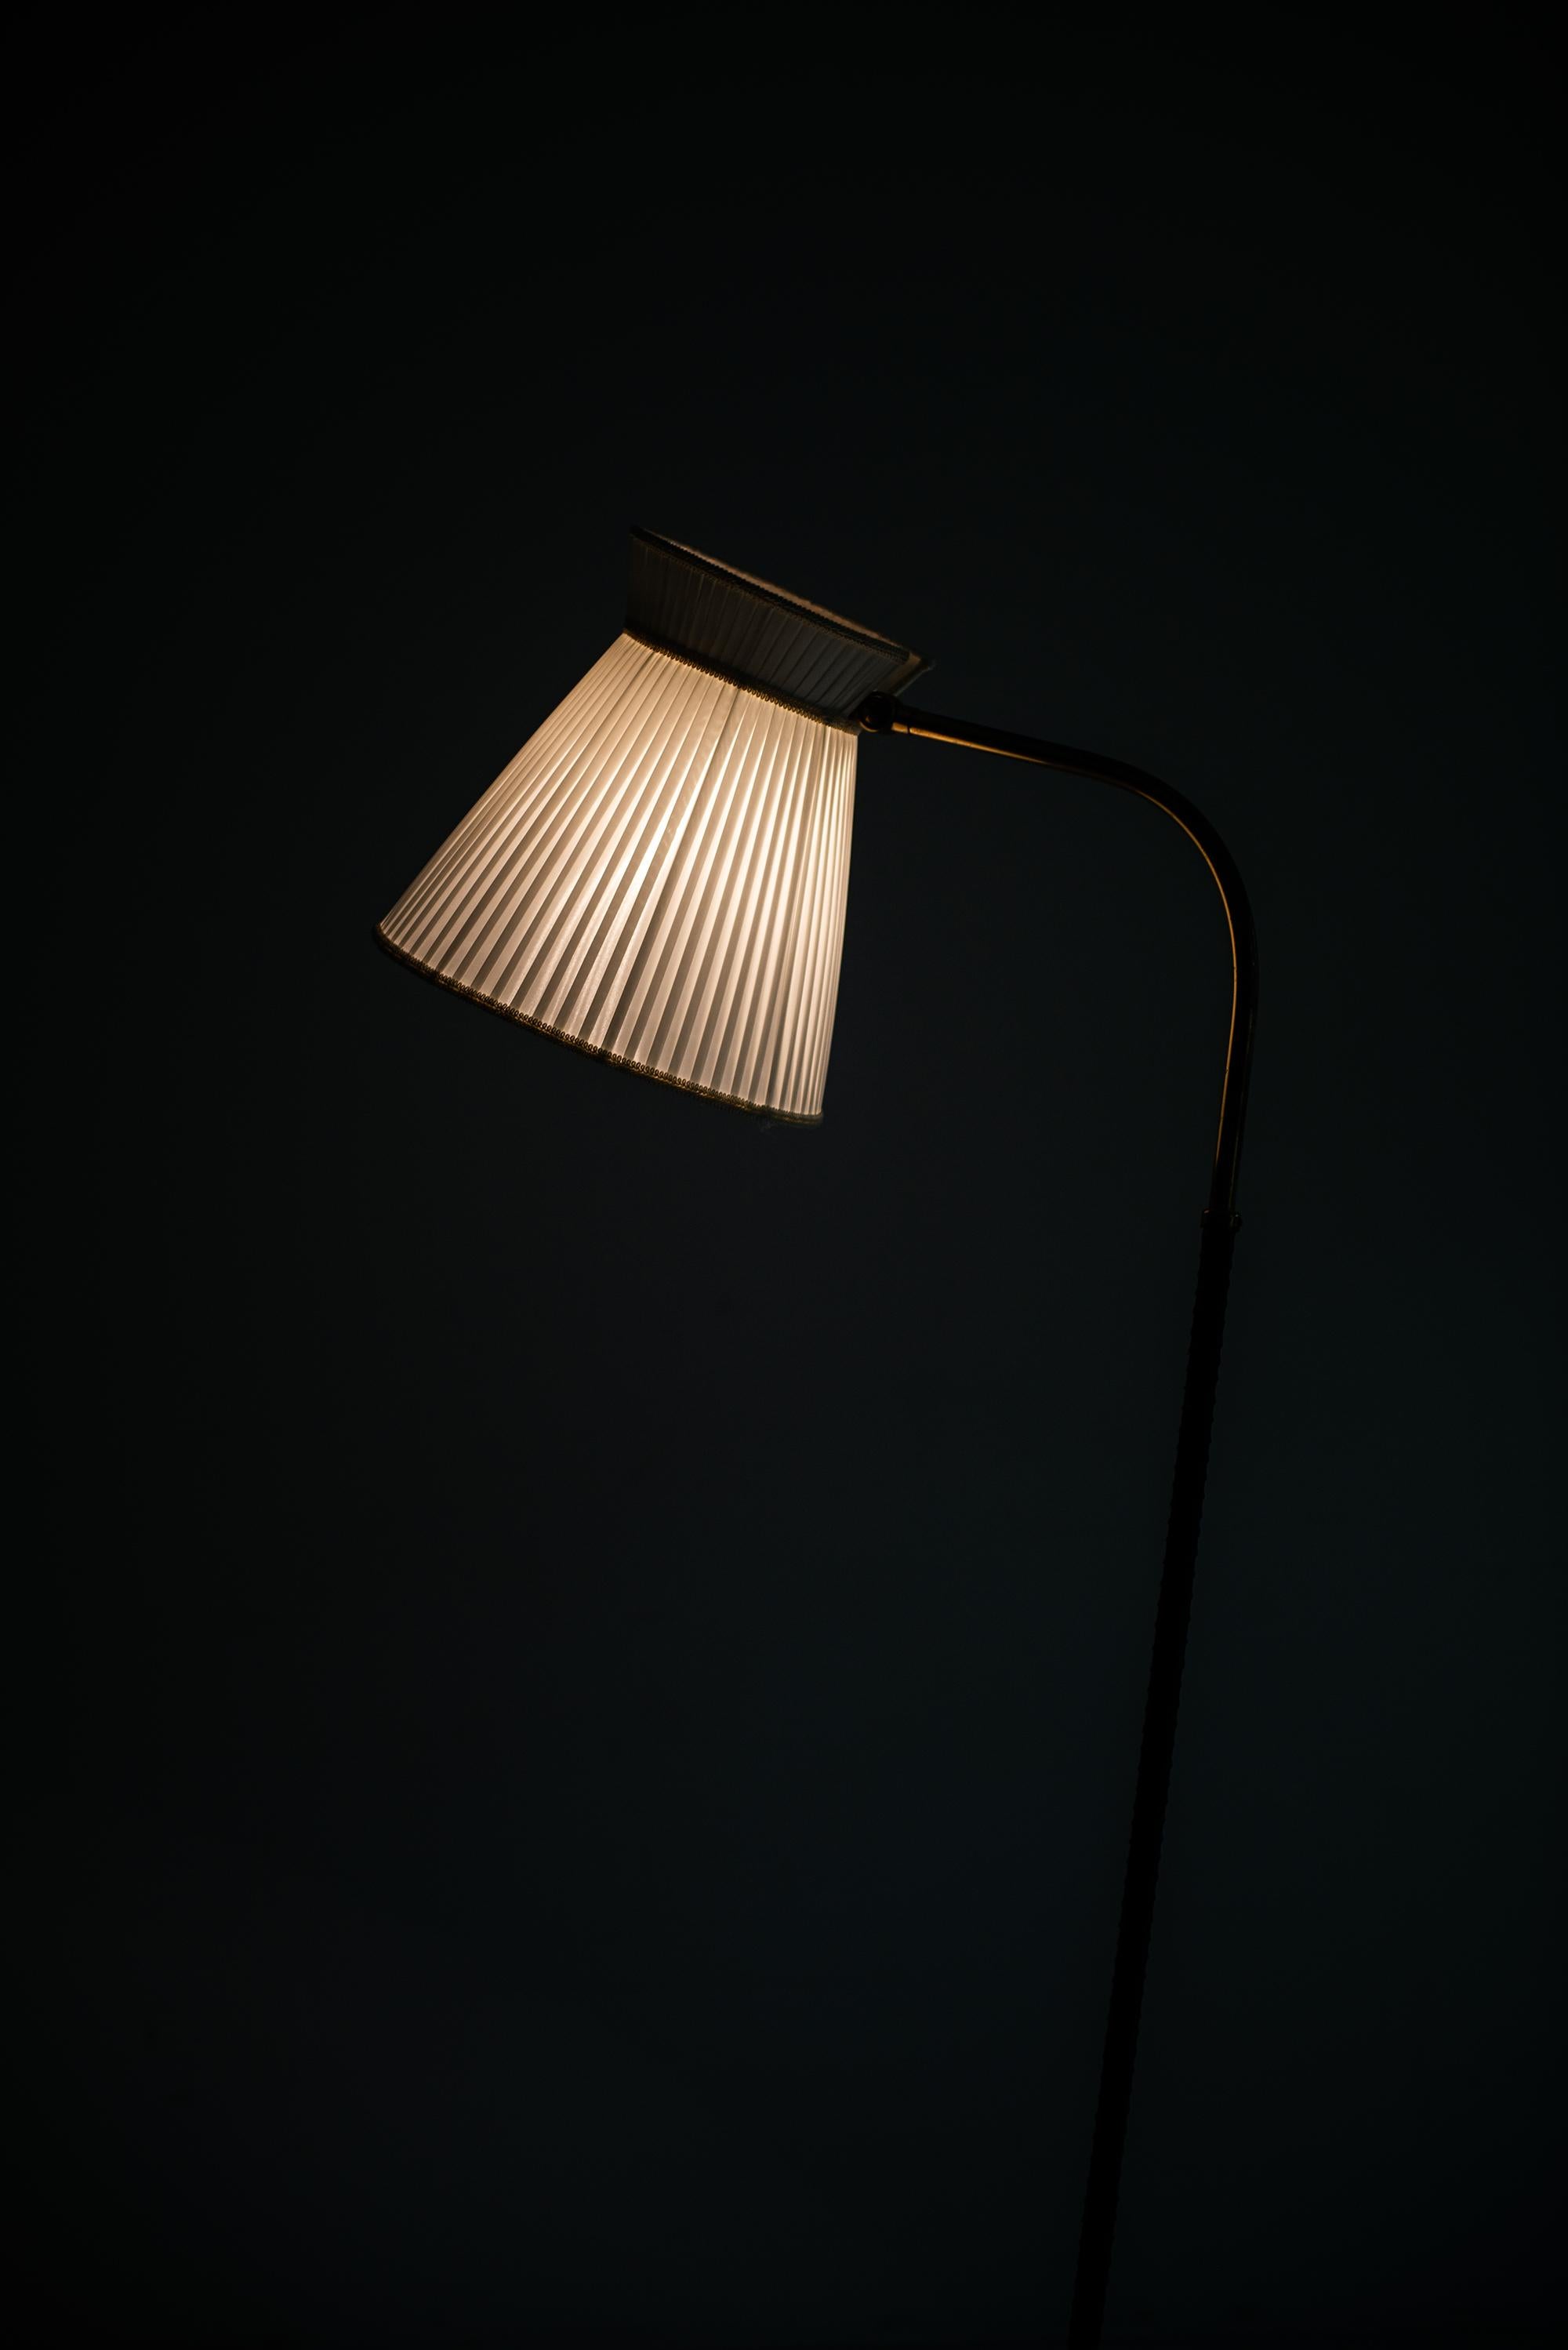 Brass Lisa Johansson-Pape Floor Lamp by Orno in Finland